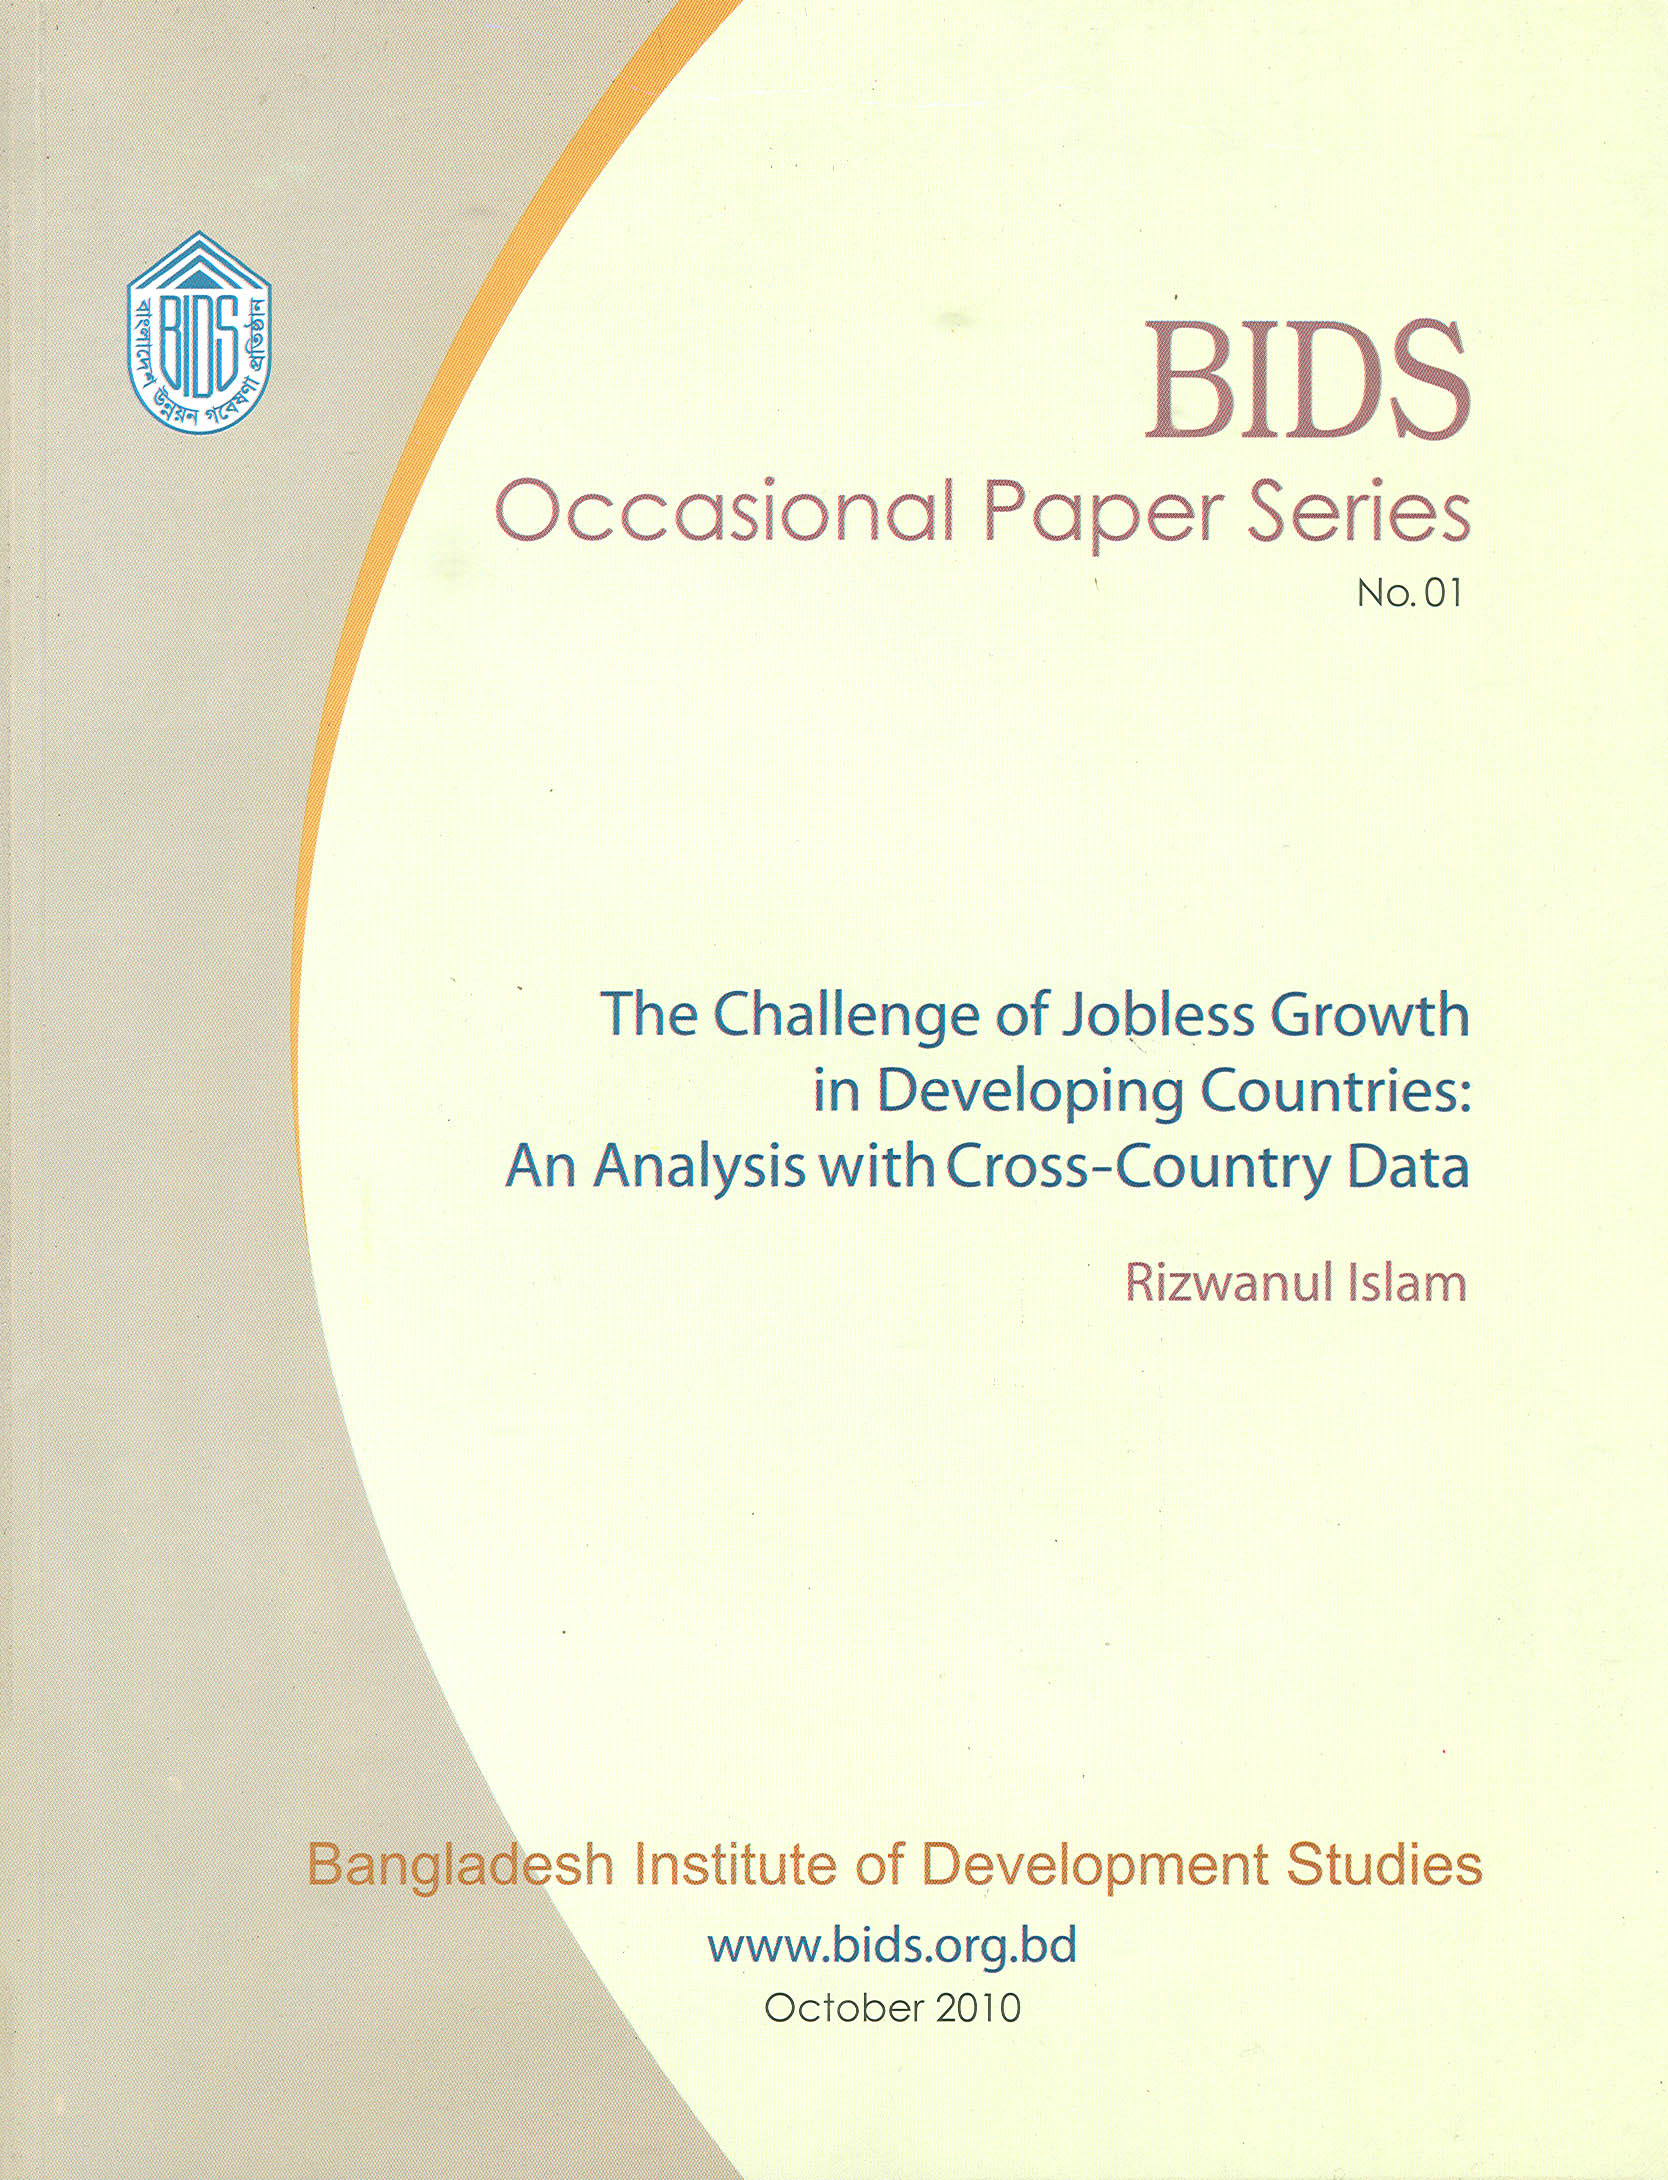 The Challenge of Jobless Growth in Developing Countries: An Analysis with Cross-Country Data BIDS Occasional Paper Series No.01